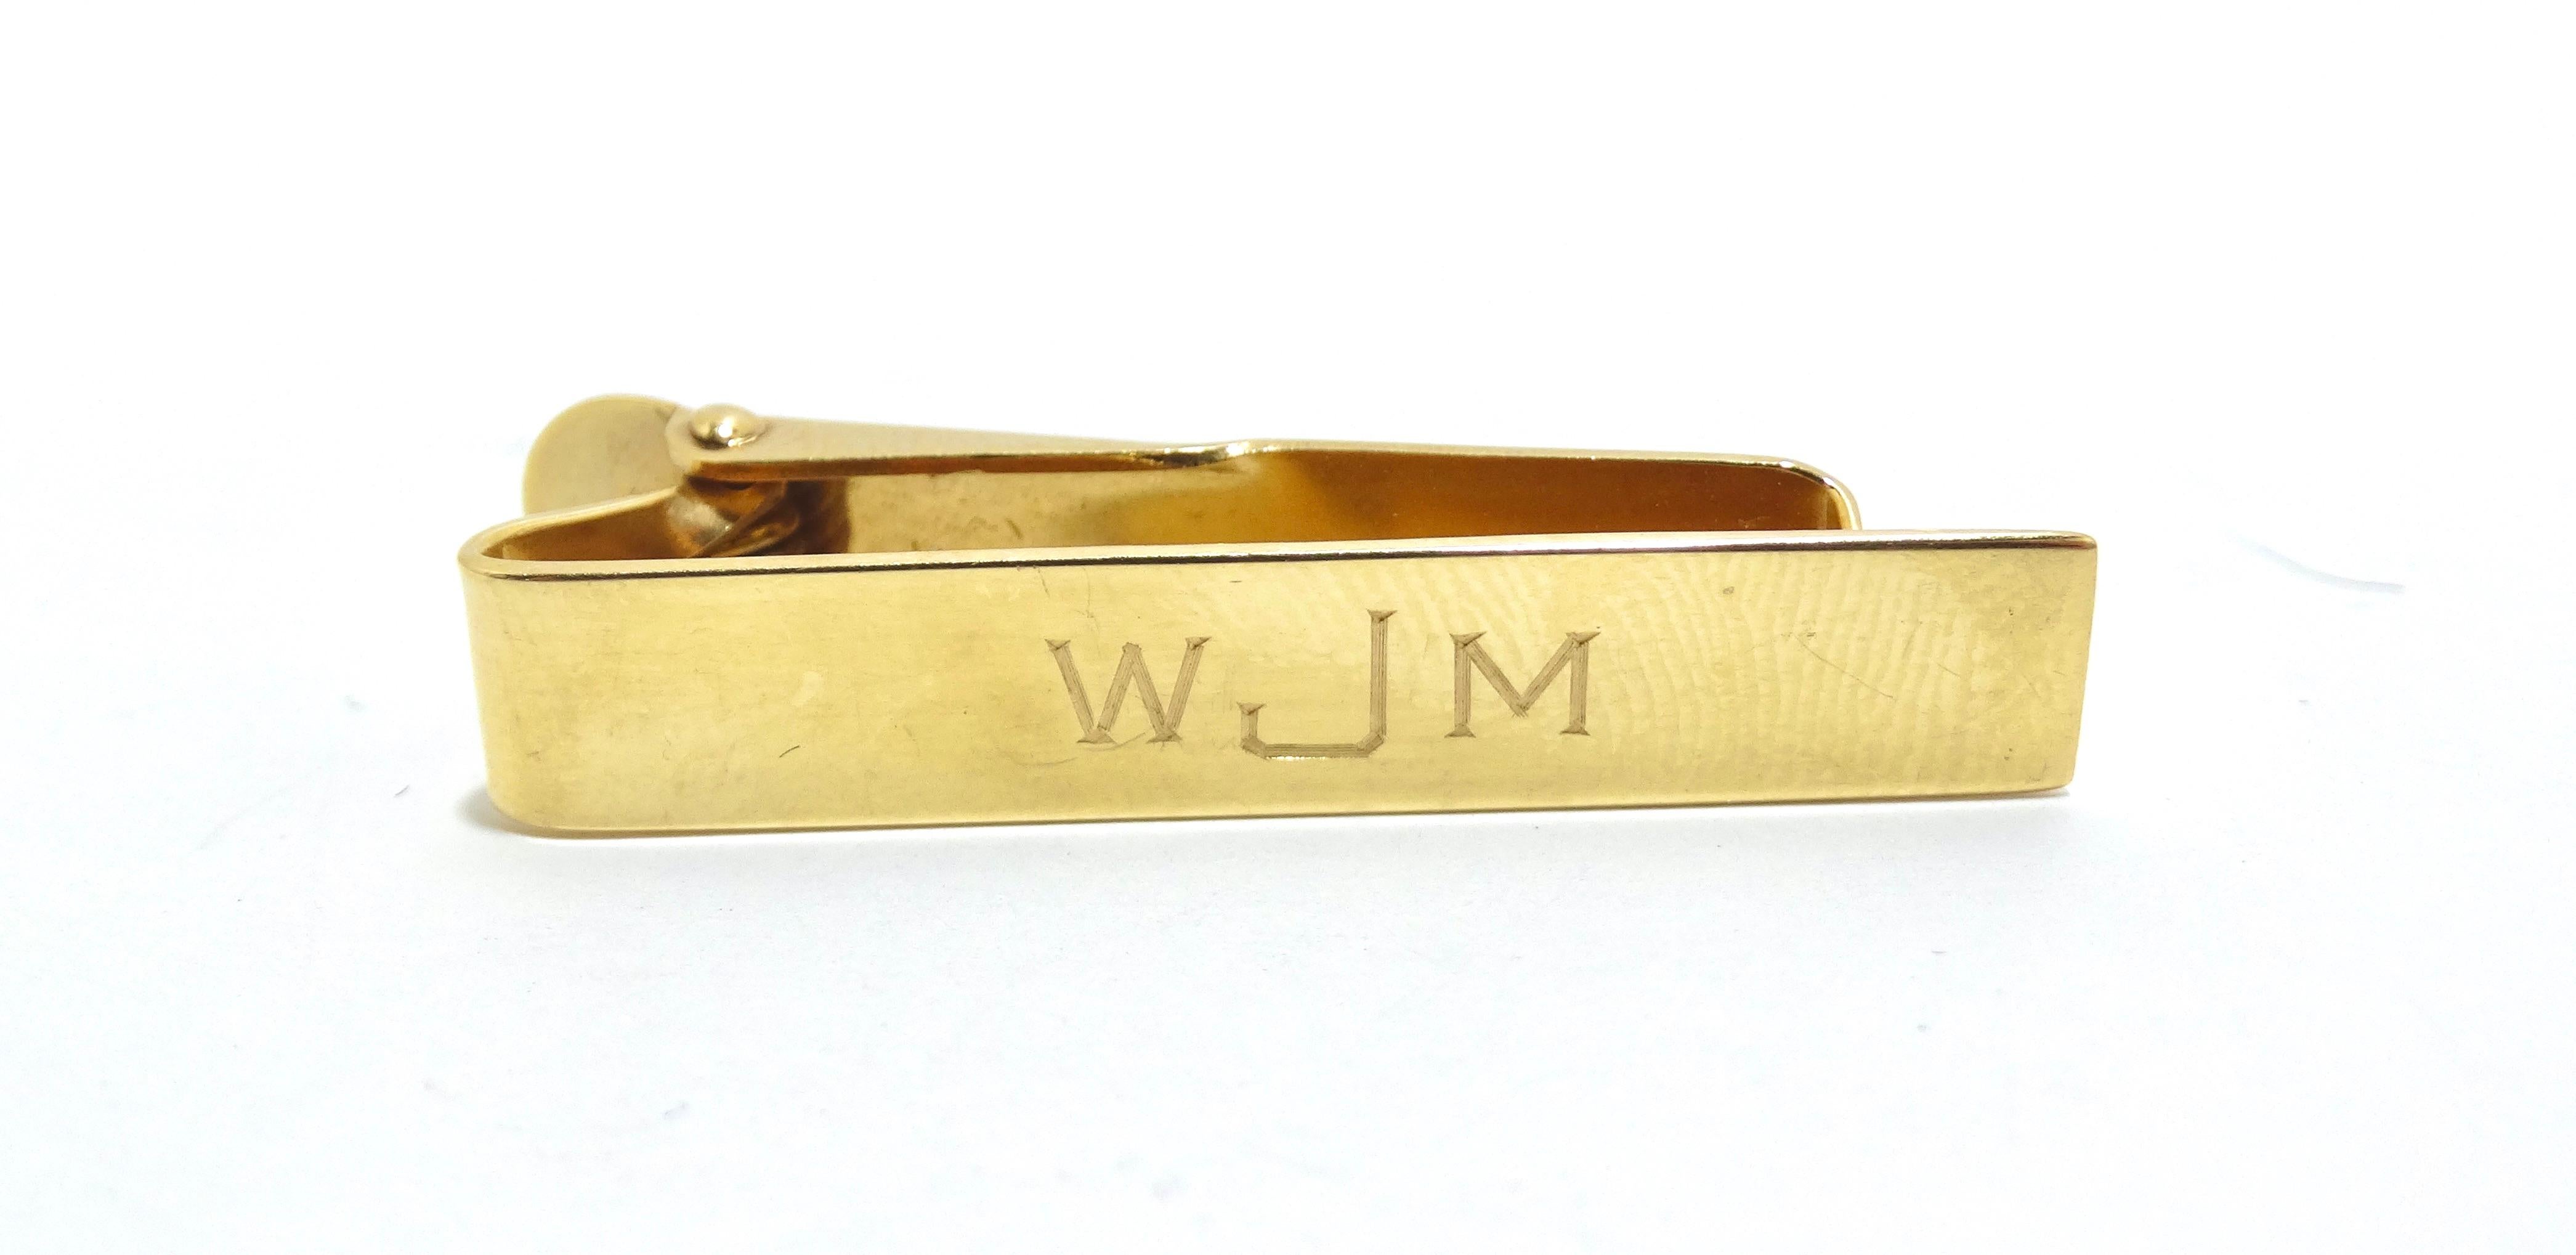 FOUND! Your new tie clip. It doesn't hurt that it is the exquisite vintage Cartier. Featured in 14k gold and signed 